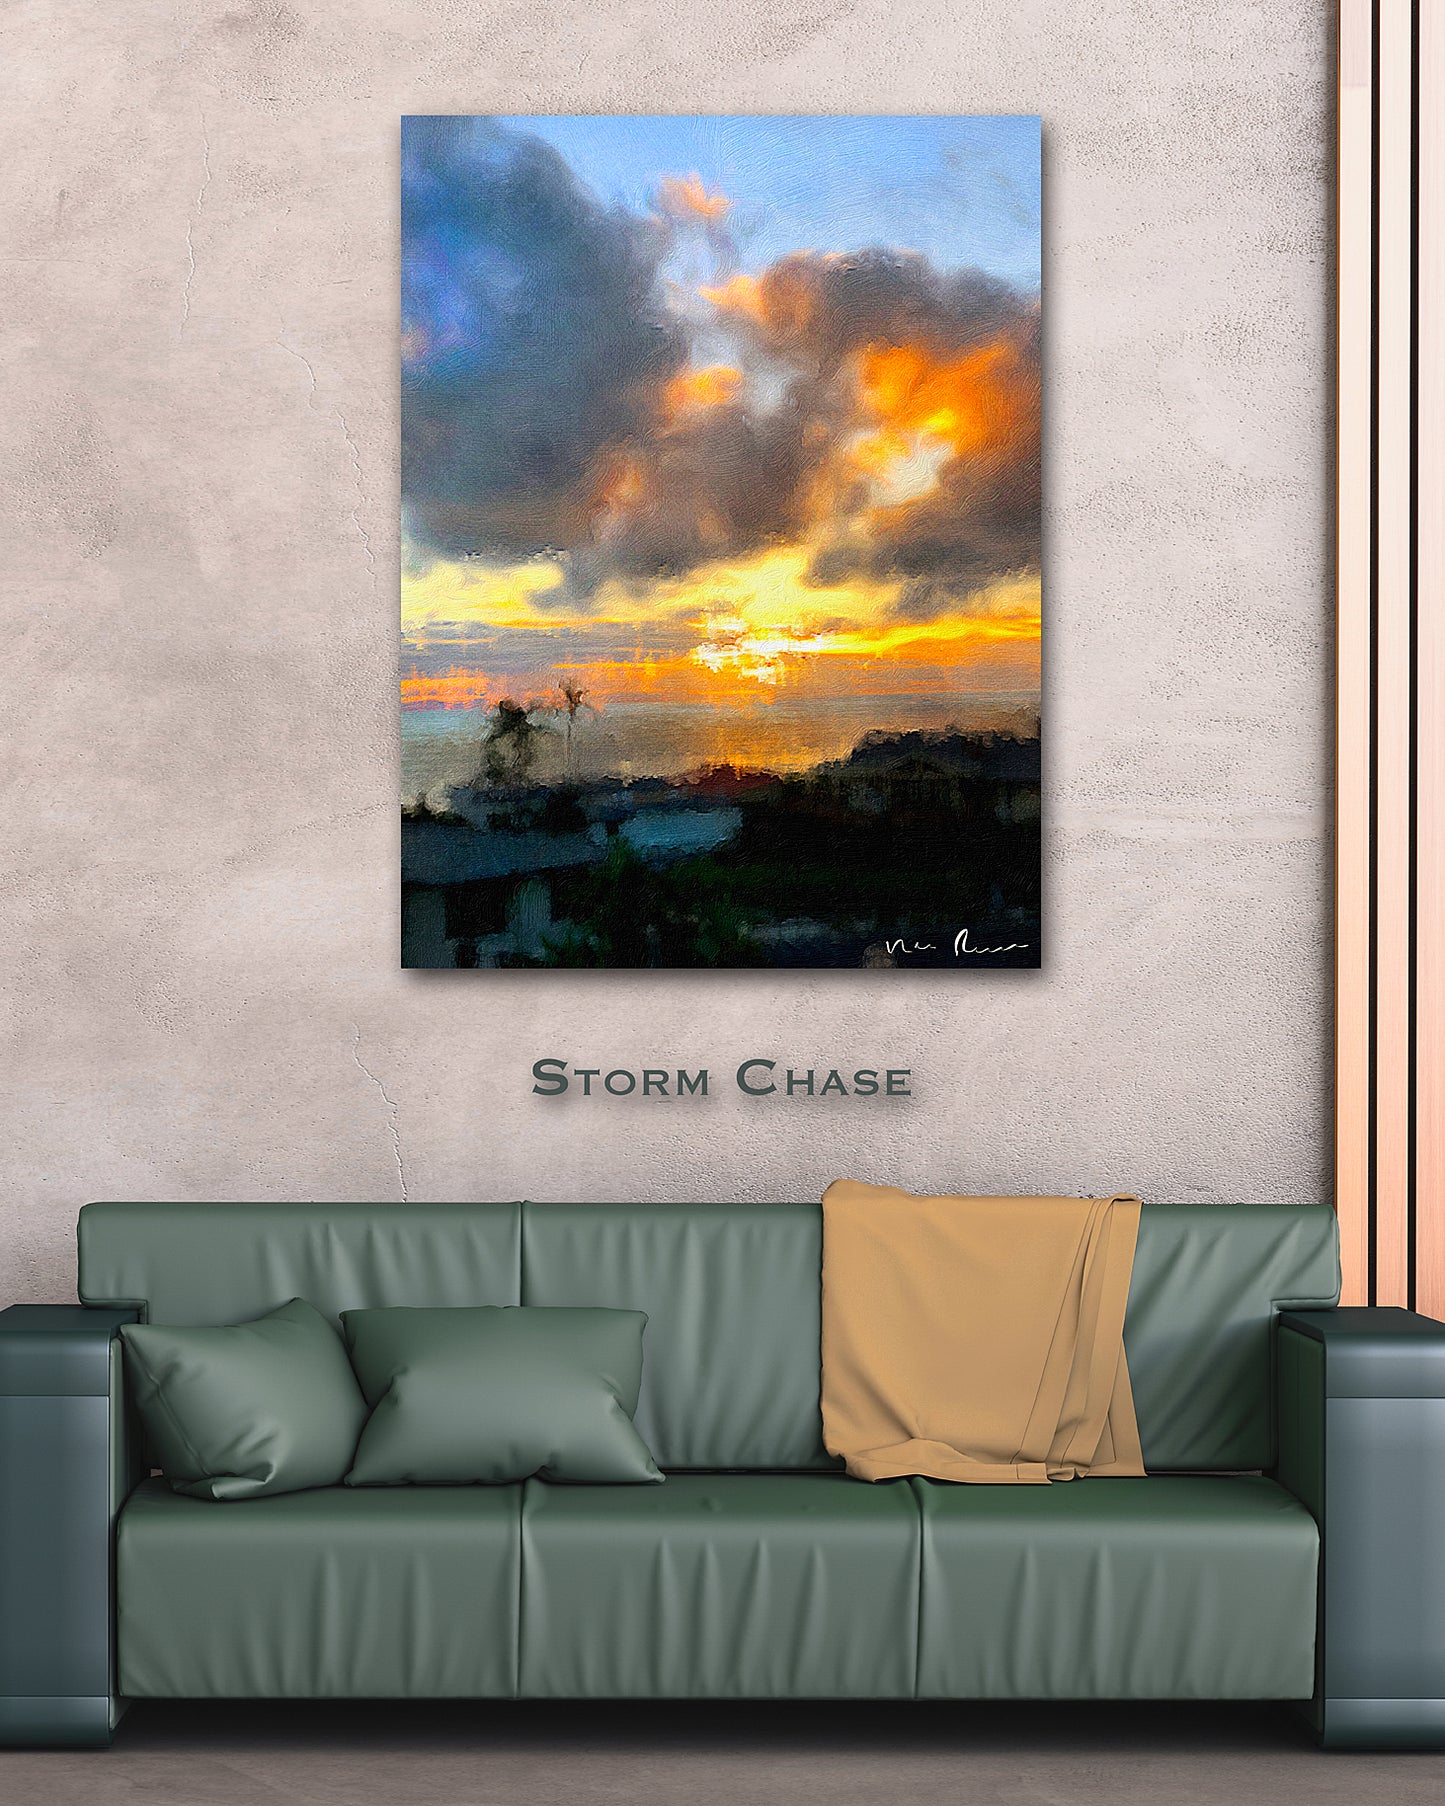 Storm Chase Wall Print 40x60